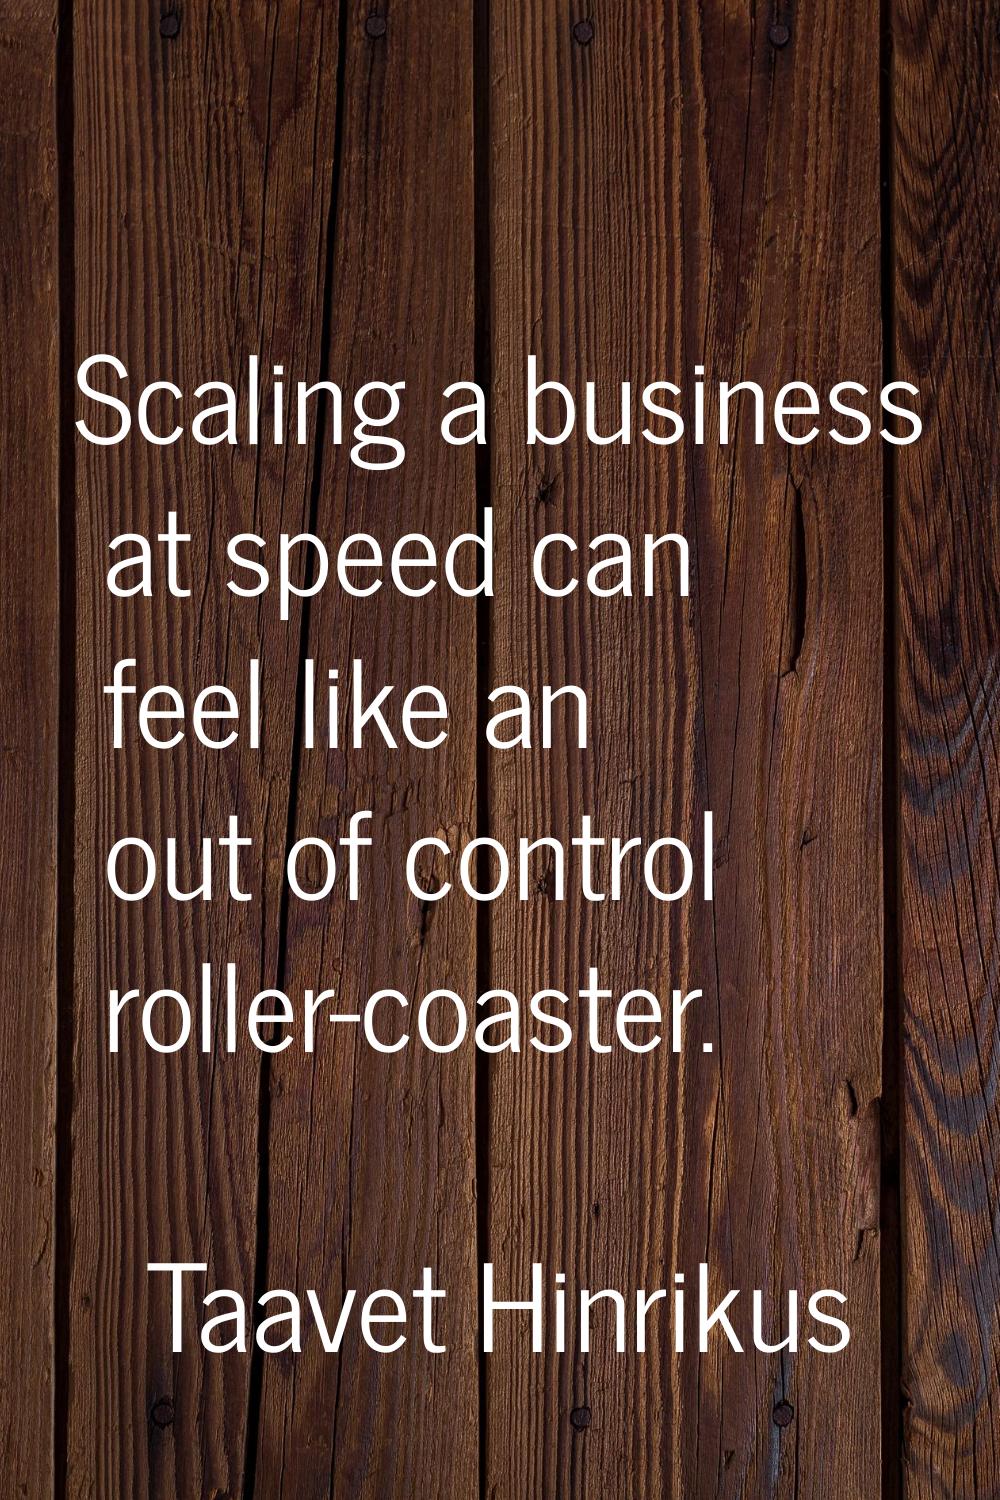 Scaling a business at speed can feel like an out of control roller-coaster.